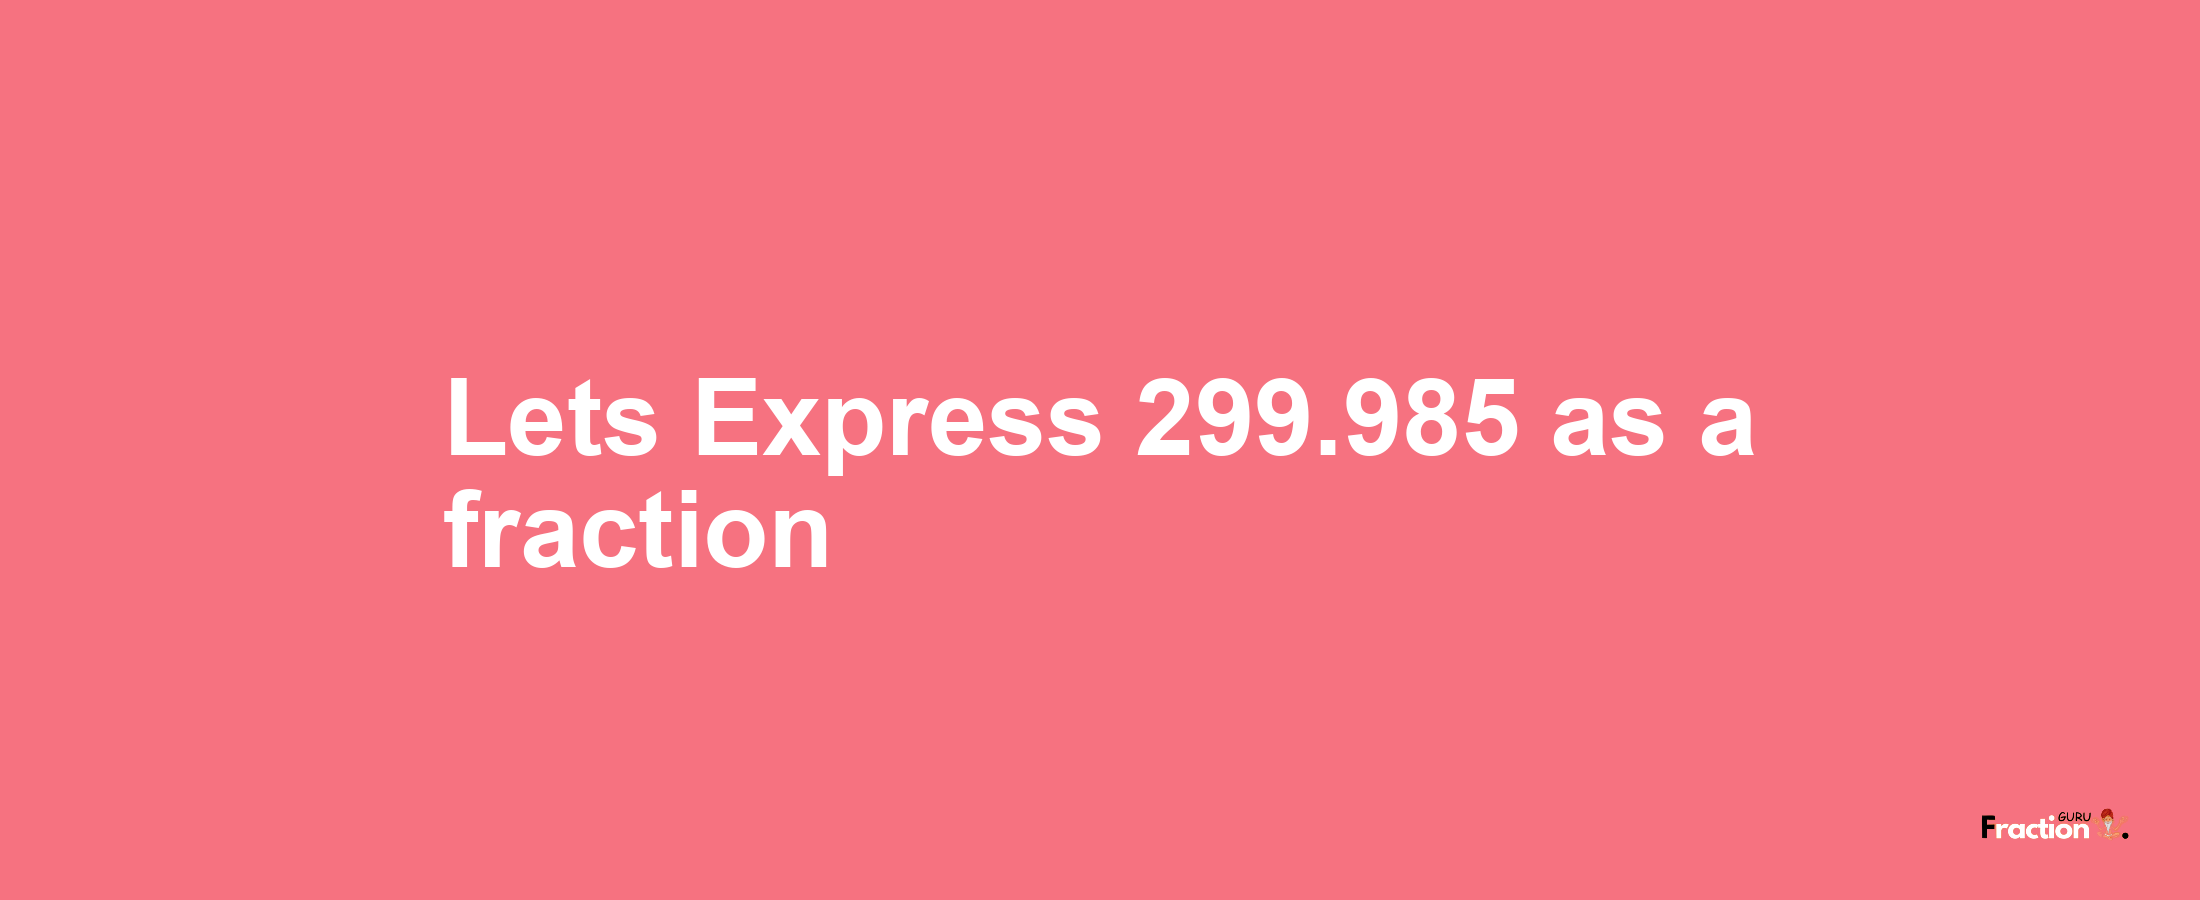 Lets Express 299.985 as afraction